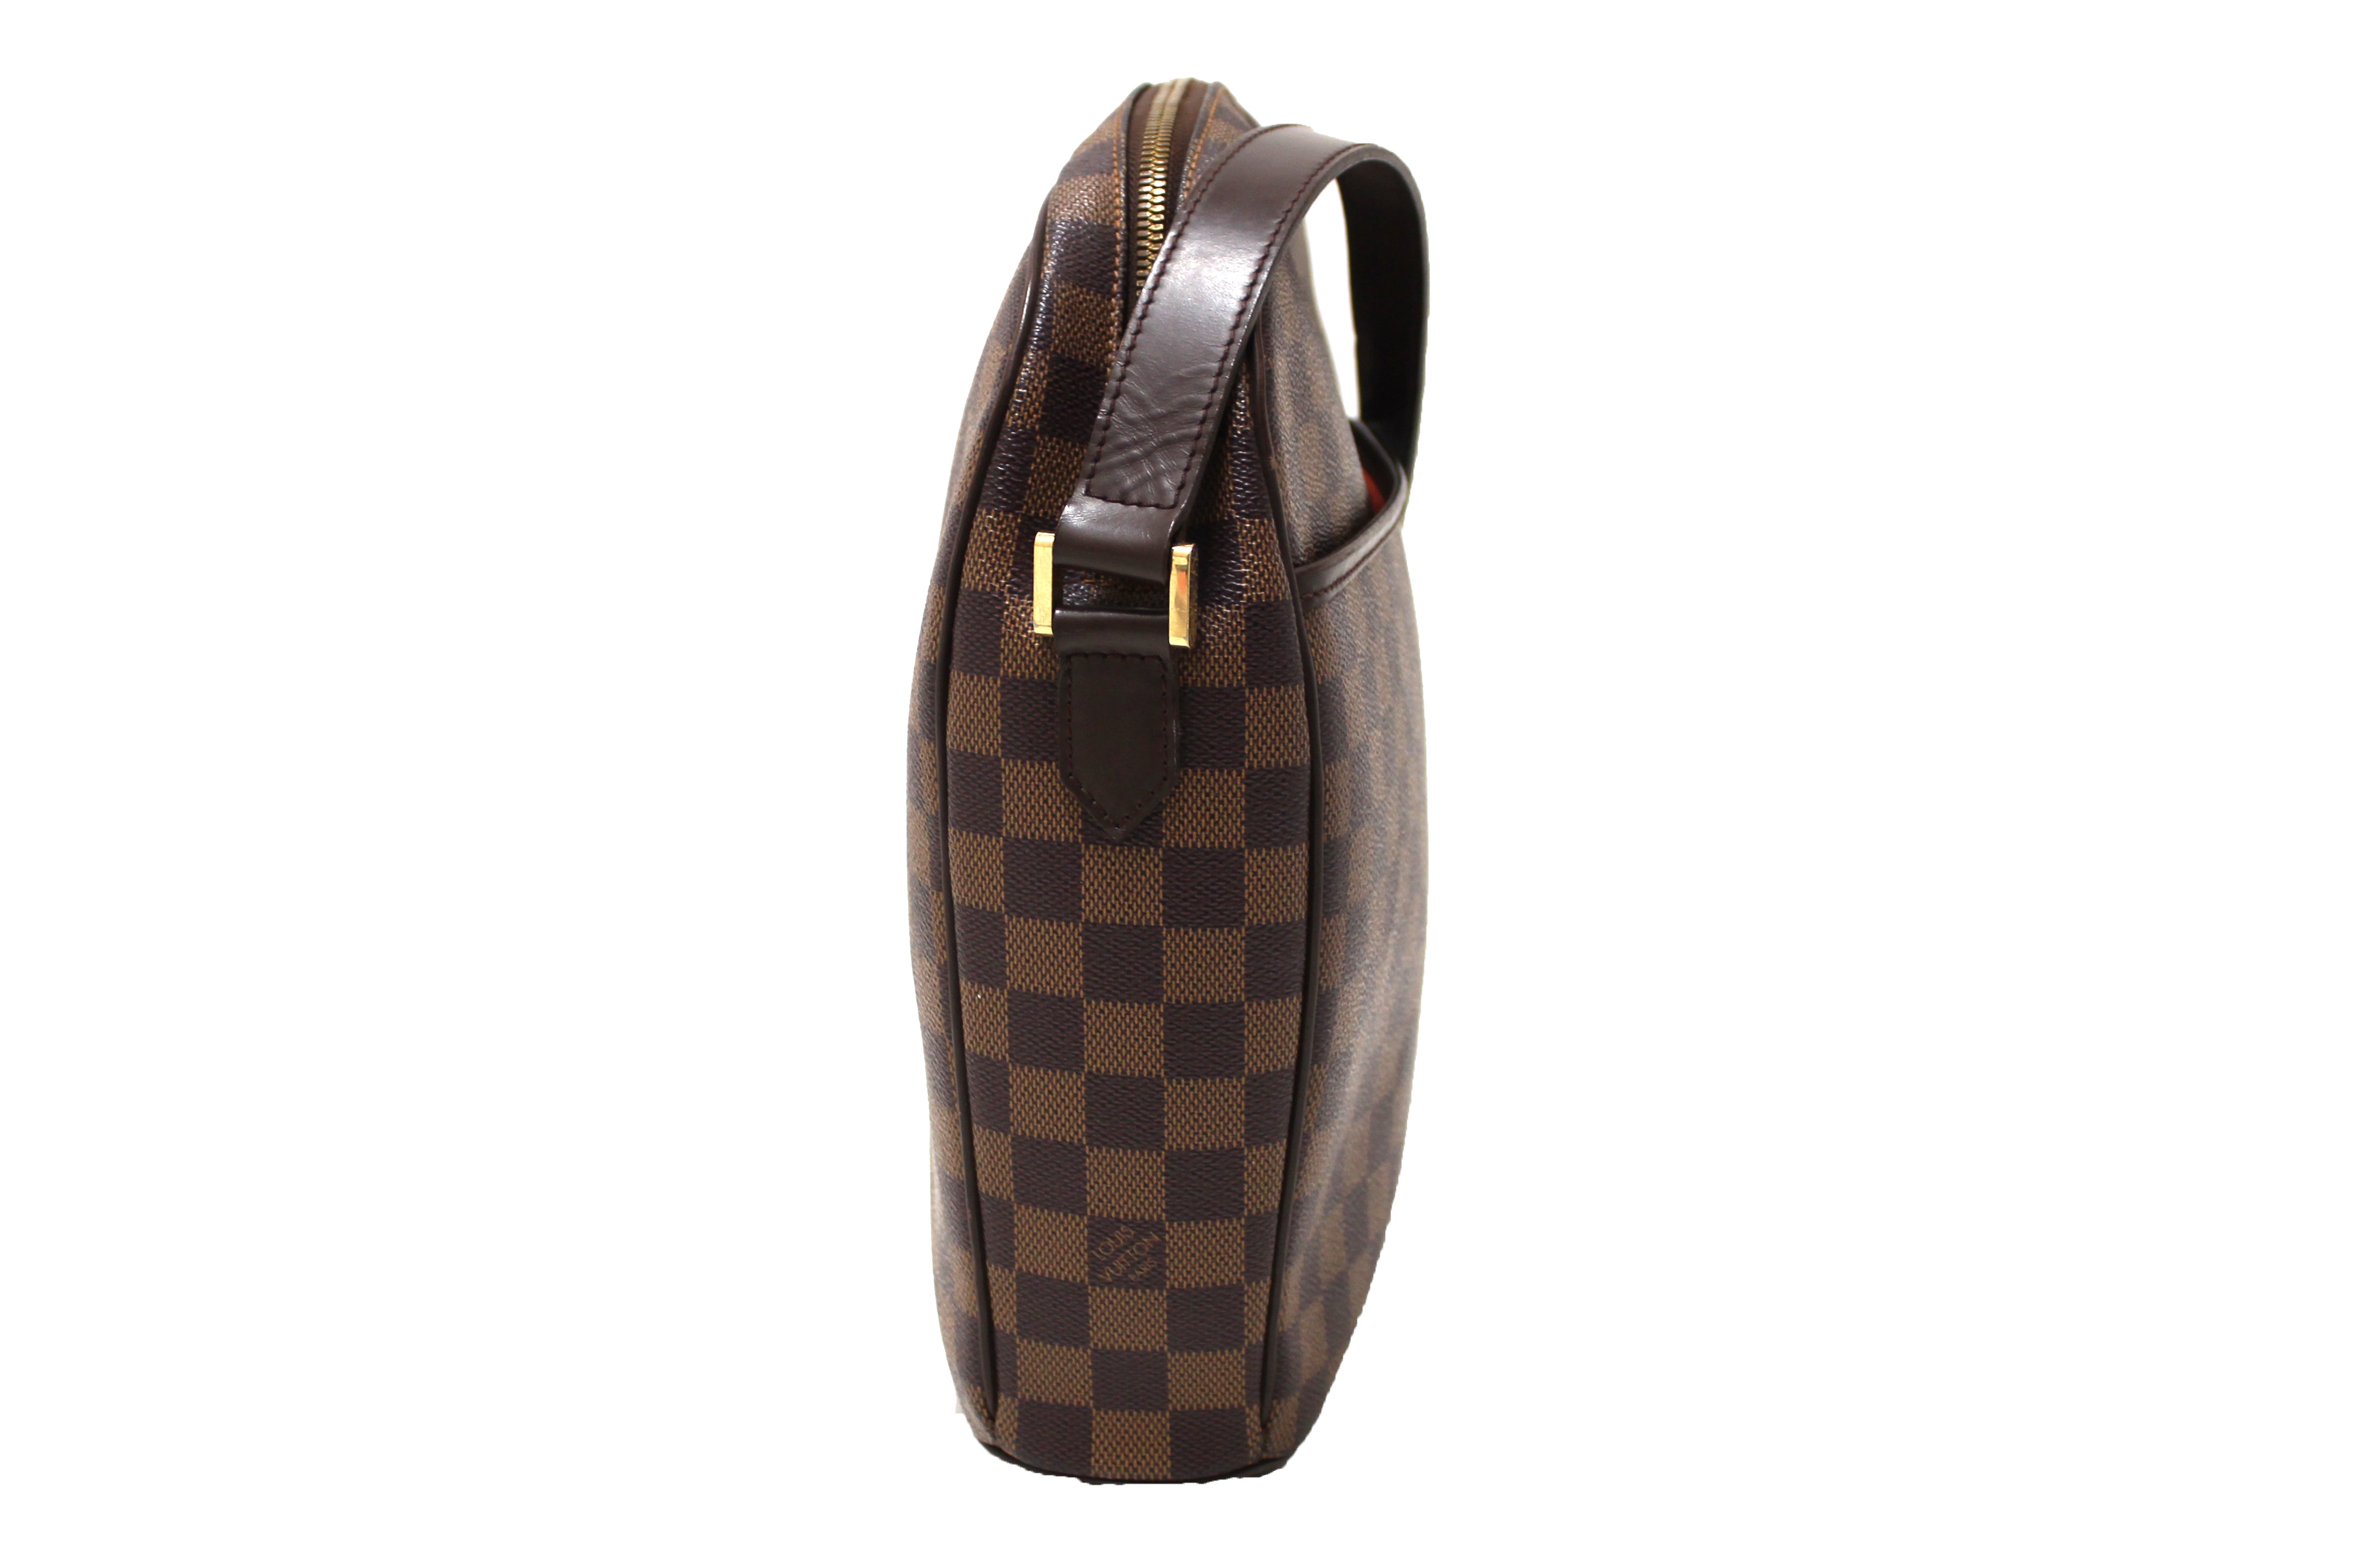 ON SALE* LOUIS VUITTON #37168 Damier Ebene Ipanema GM – ALL YOUR BLISS